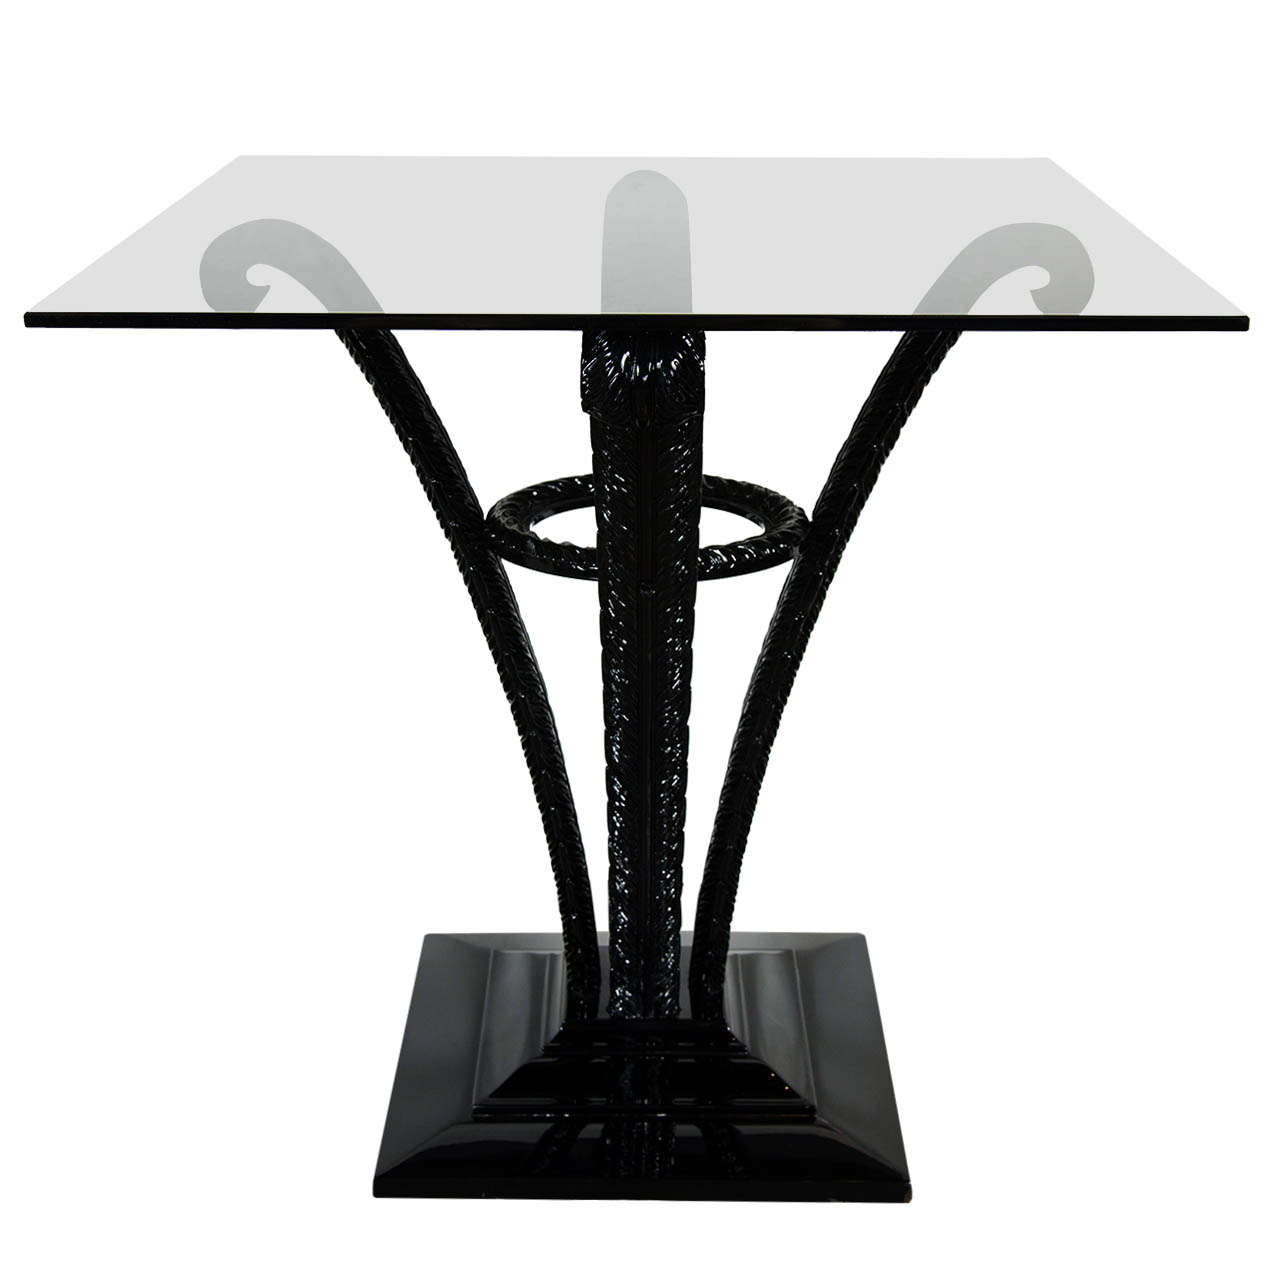 Elegant Art Deco Plume Form Table by Grosfeld House in Black Lacquer